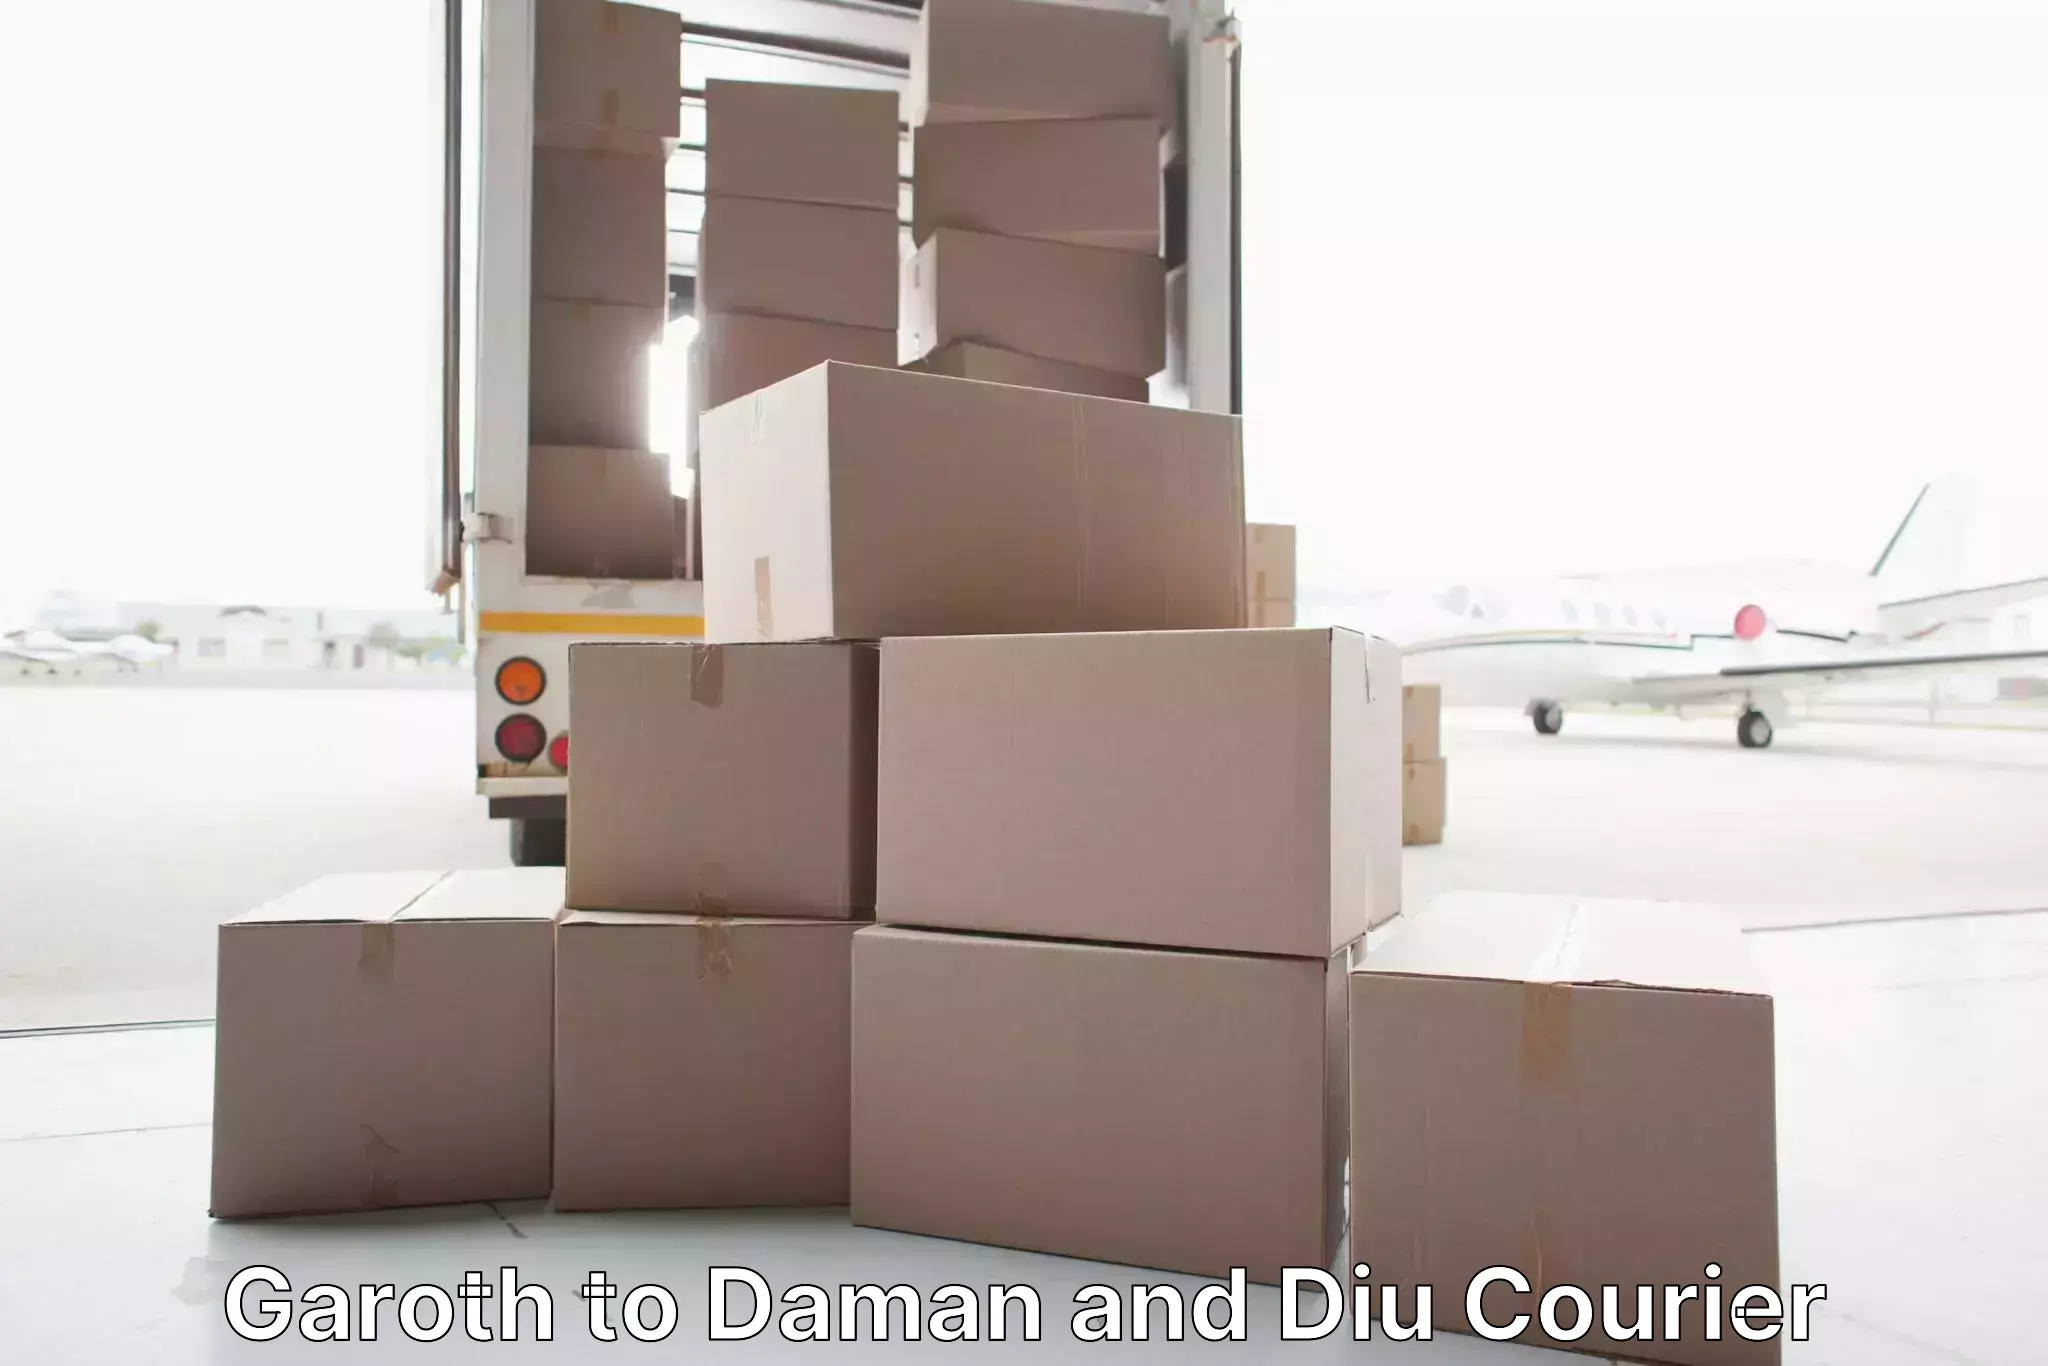 Budget-friendly movers in Garoth to Daman and Diu